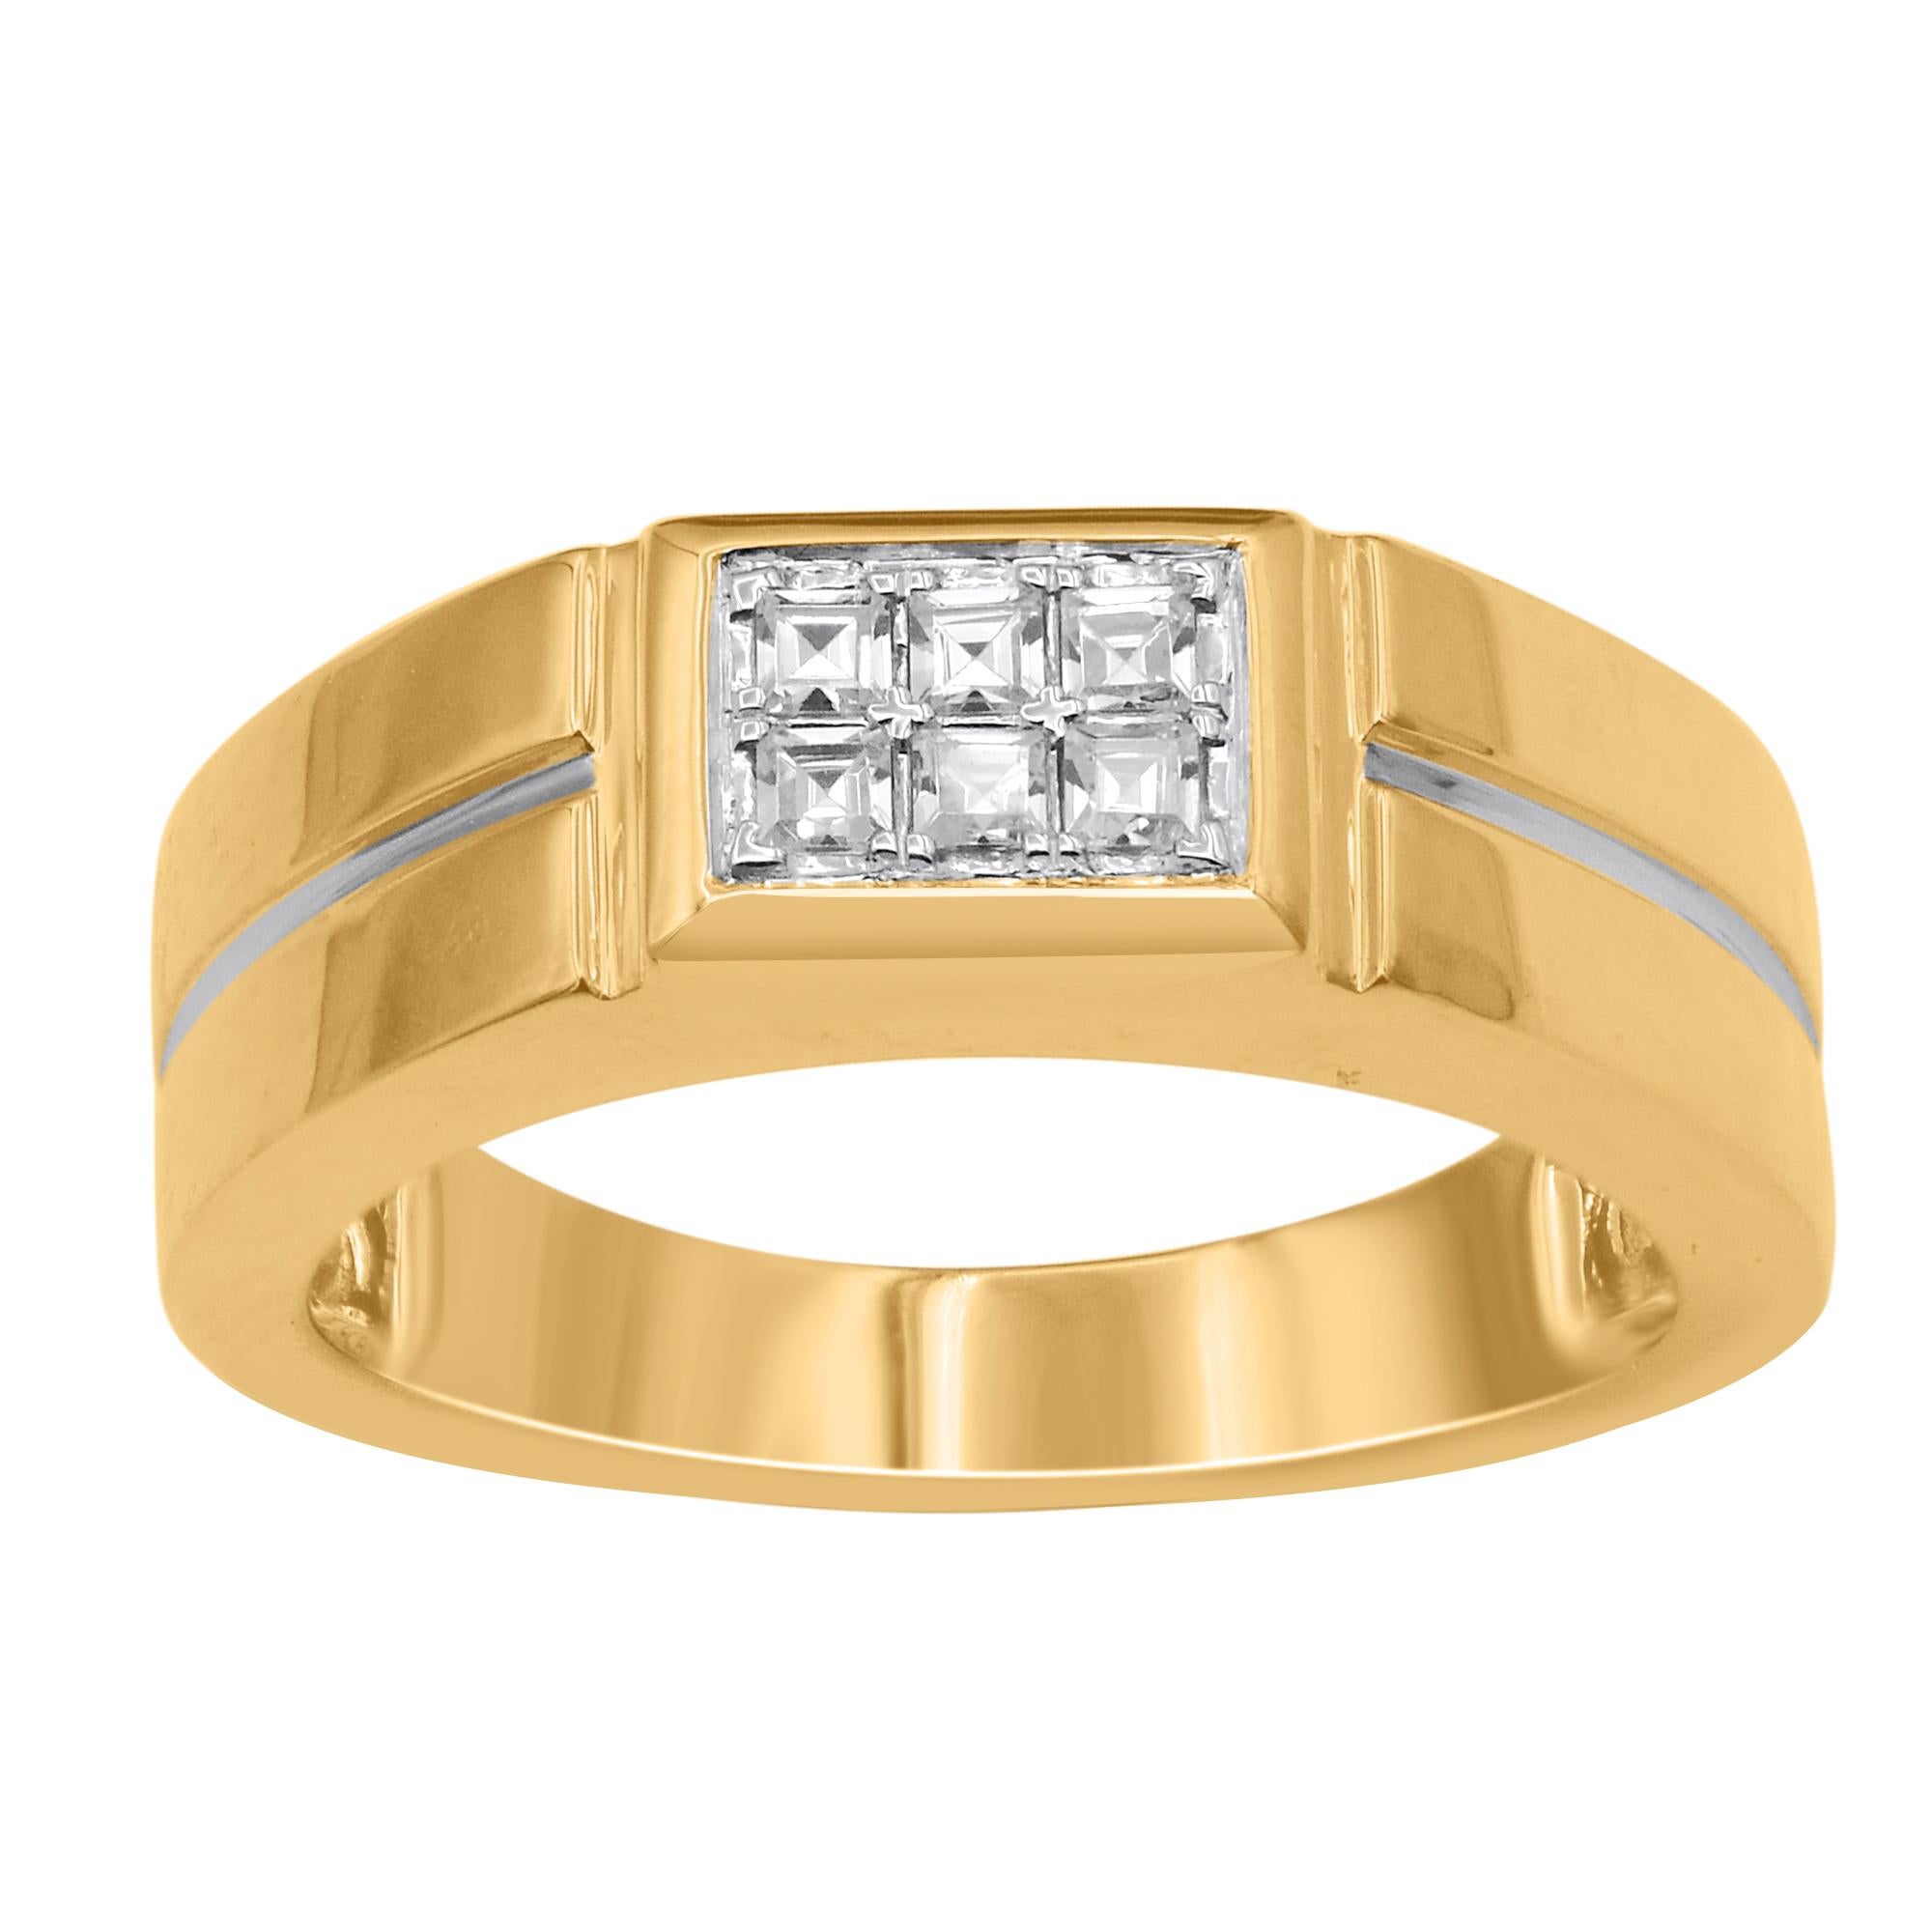 TJD 0.30 Carat Princess Cut Diamond 18KT Yellow Gold Men's Wedding Band Ring In New Condition For Sale In New York, NY